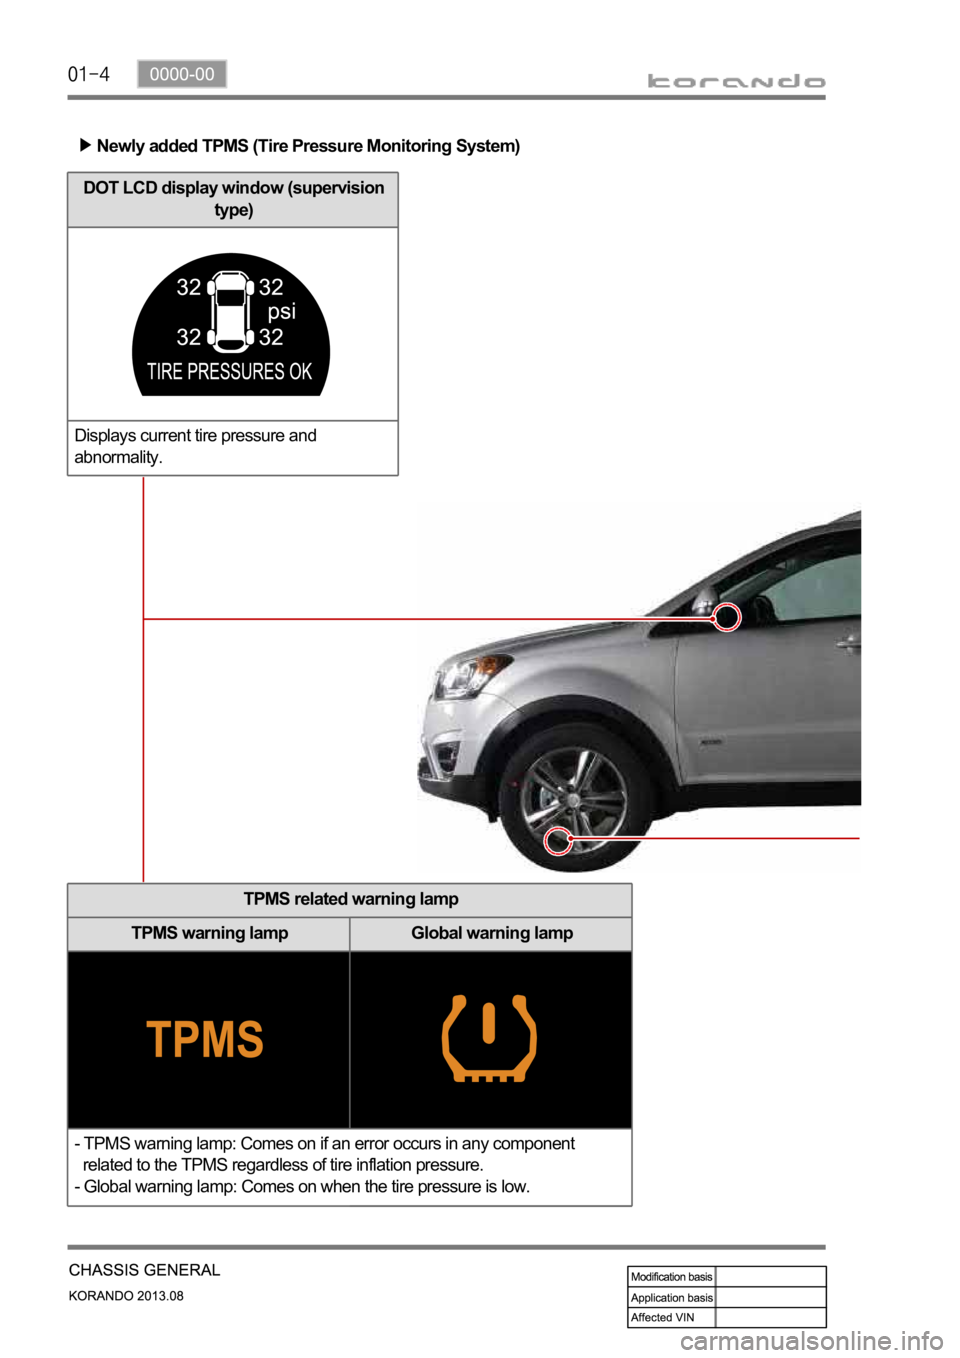 SSANGYONG KORANDO 2013  Service Manual Newly added TPMS (Tire Pressure Monitoring System)
TPMS related warning lamp
TPMS warning lamp Global warning lamp
- TPMS warning lamp: Comes on if an error occurs in any component 
  related to the T